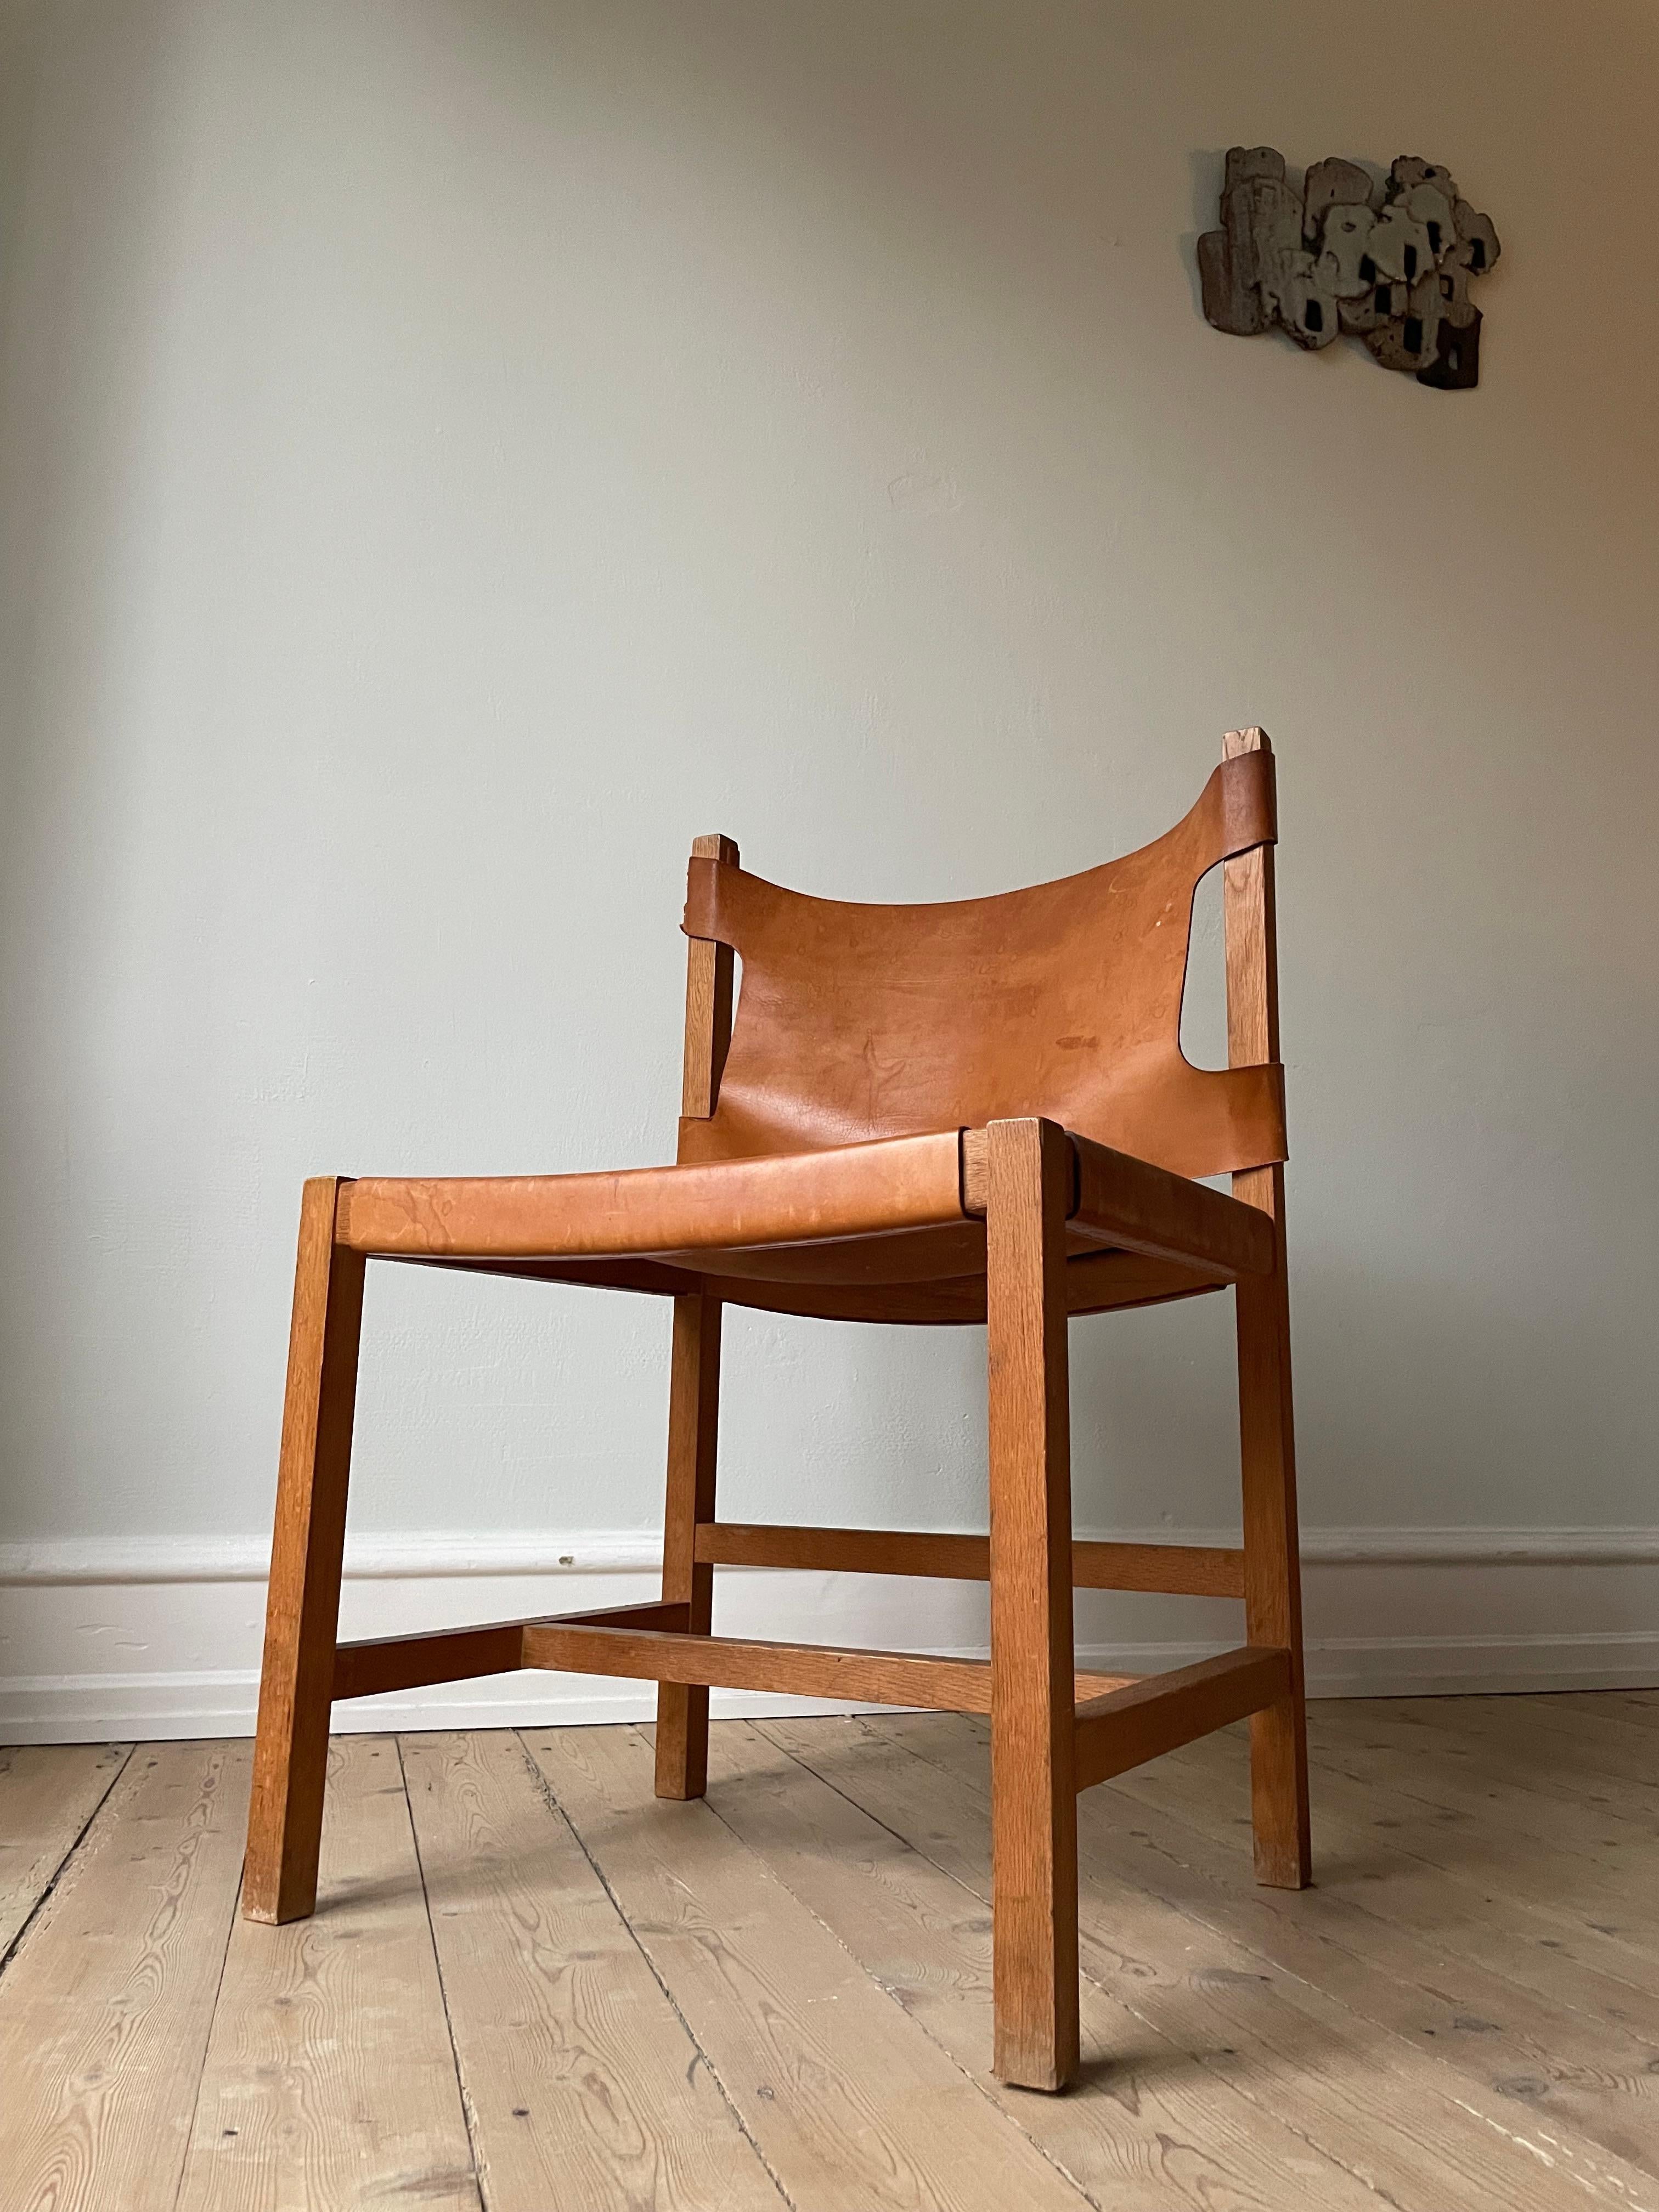 Danish Modern Wooden Leather Seat Chair, 1960s For Sale 5